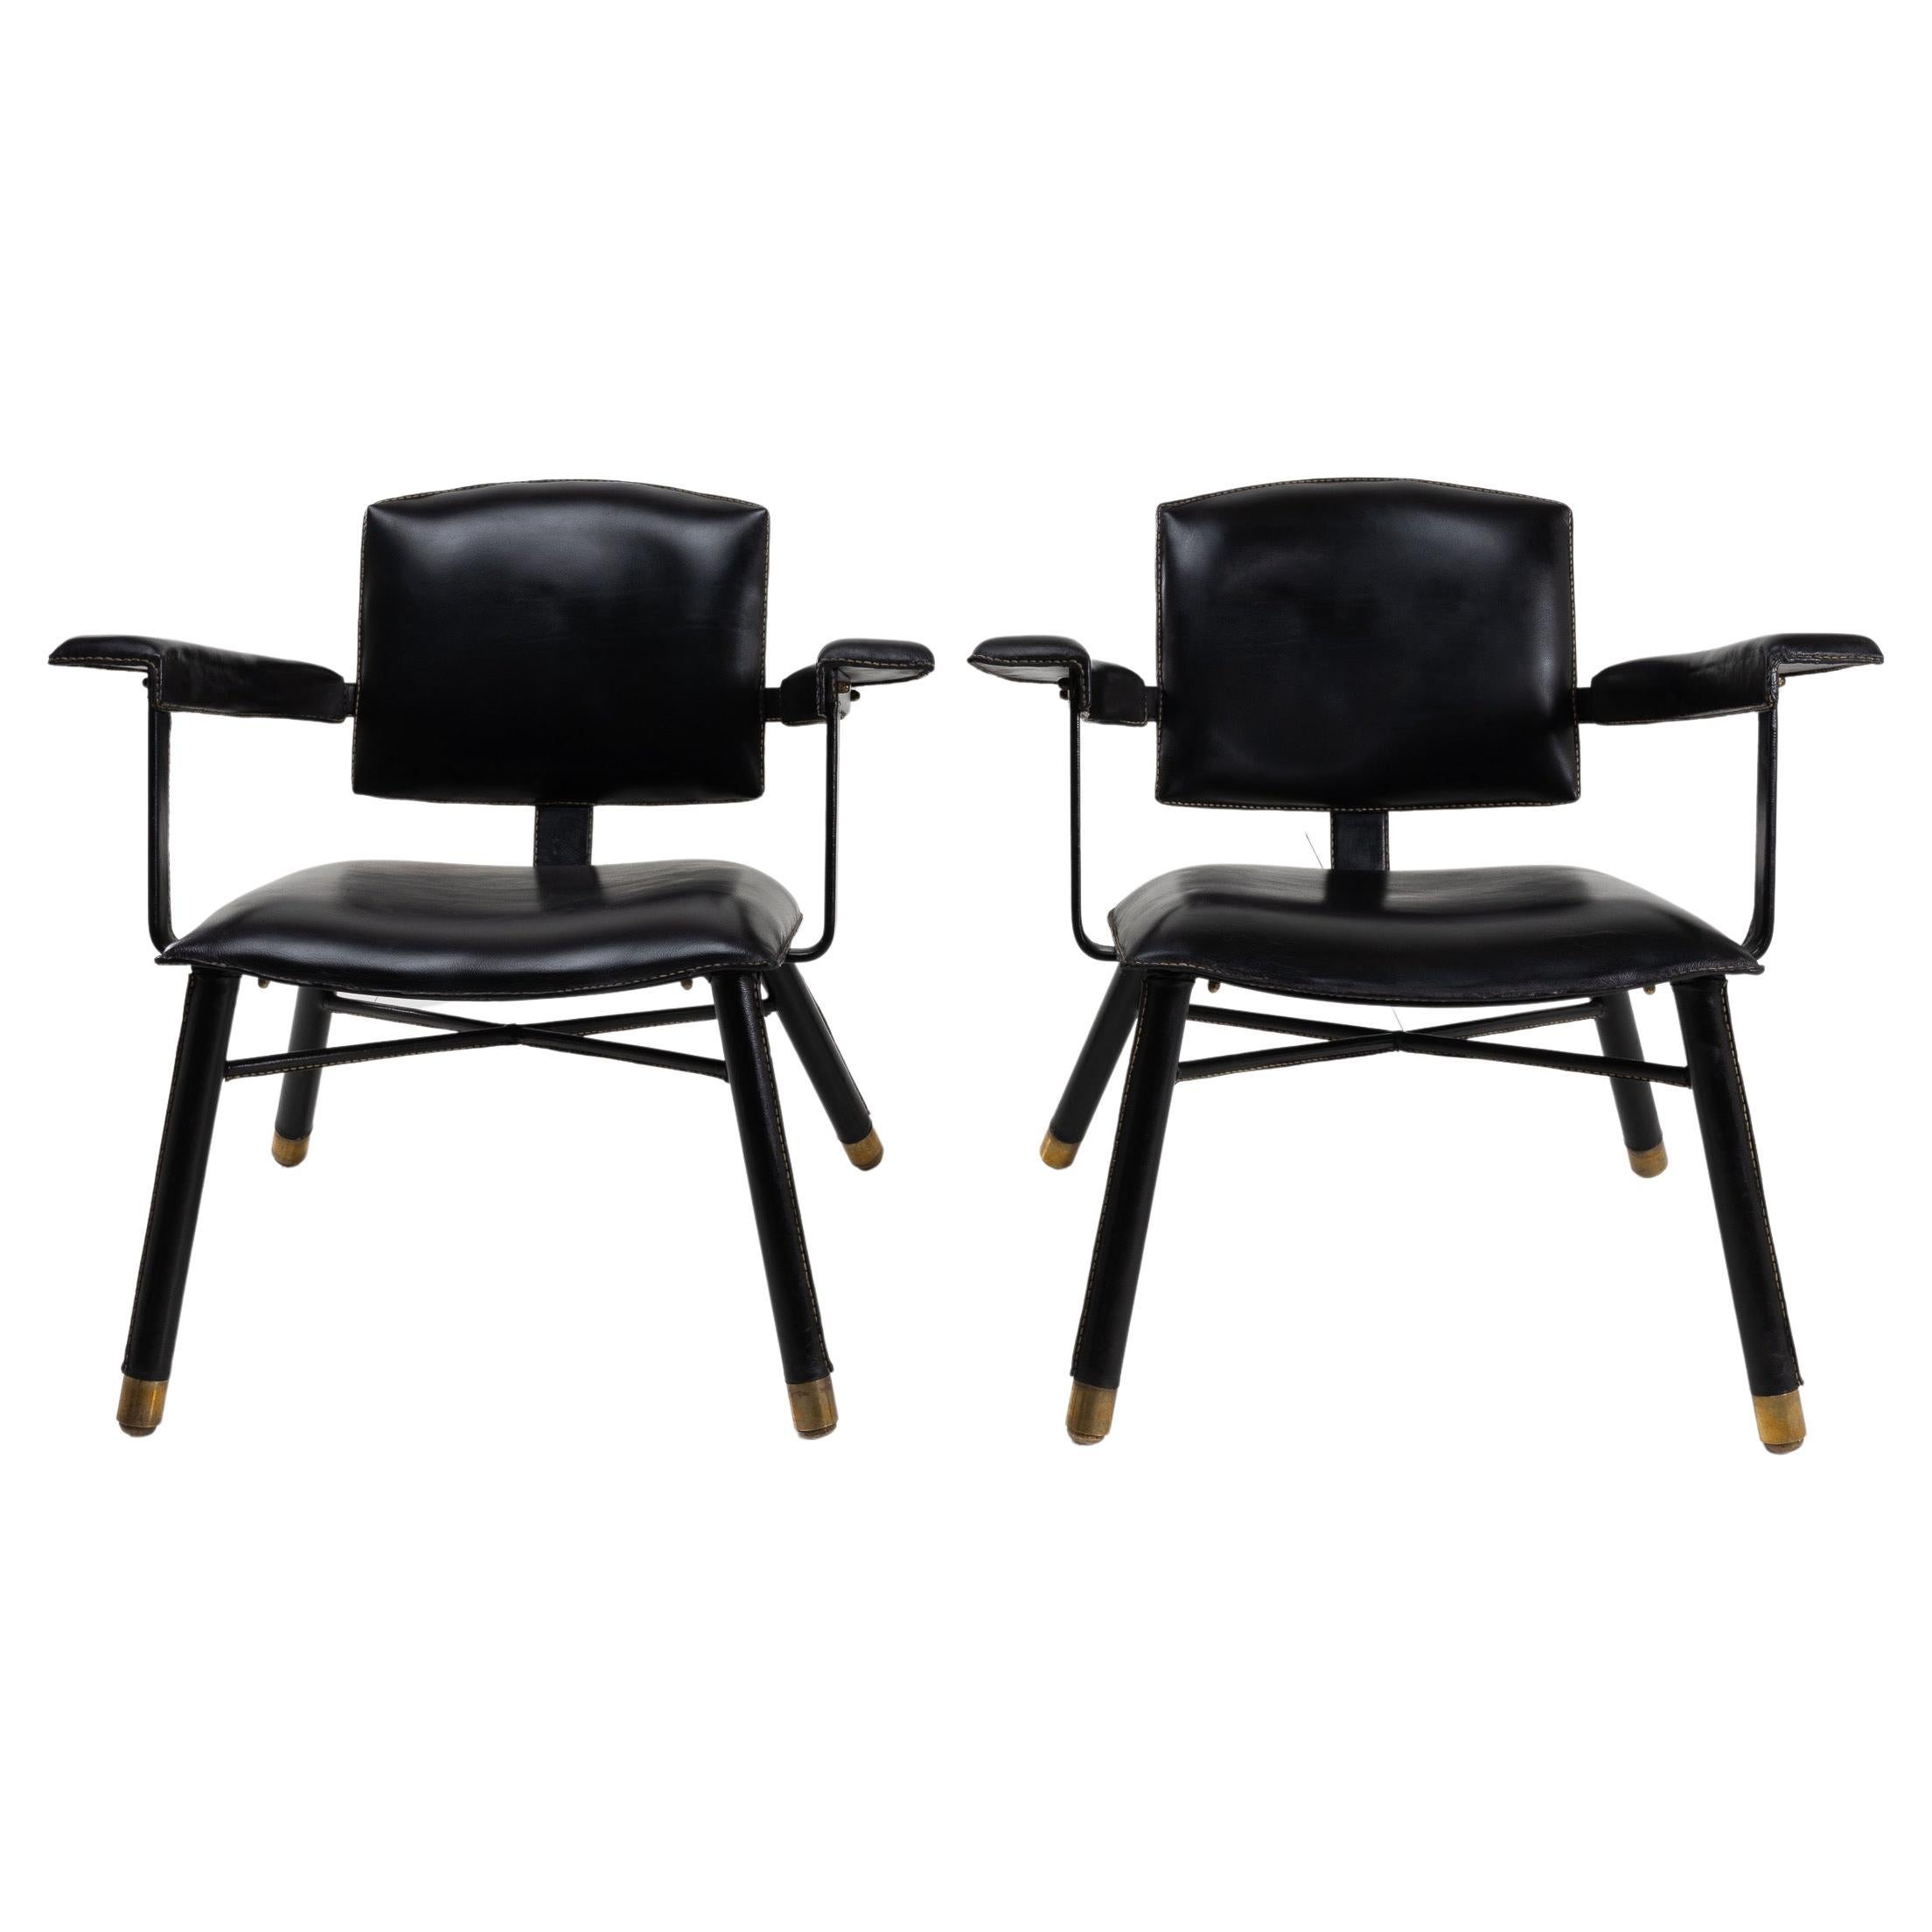 Pair of Black Leather Armchairs Called “Chauffeuse” by Jacques Adnet For  Sale at 1stDibs